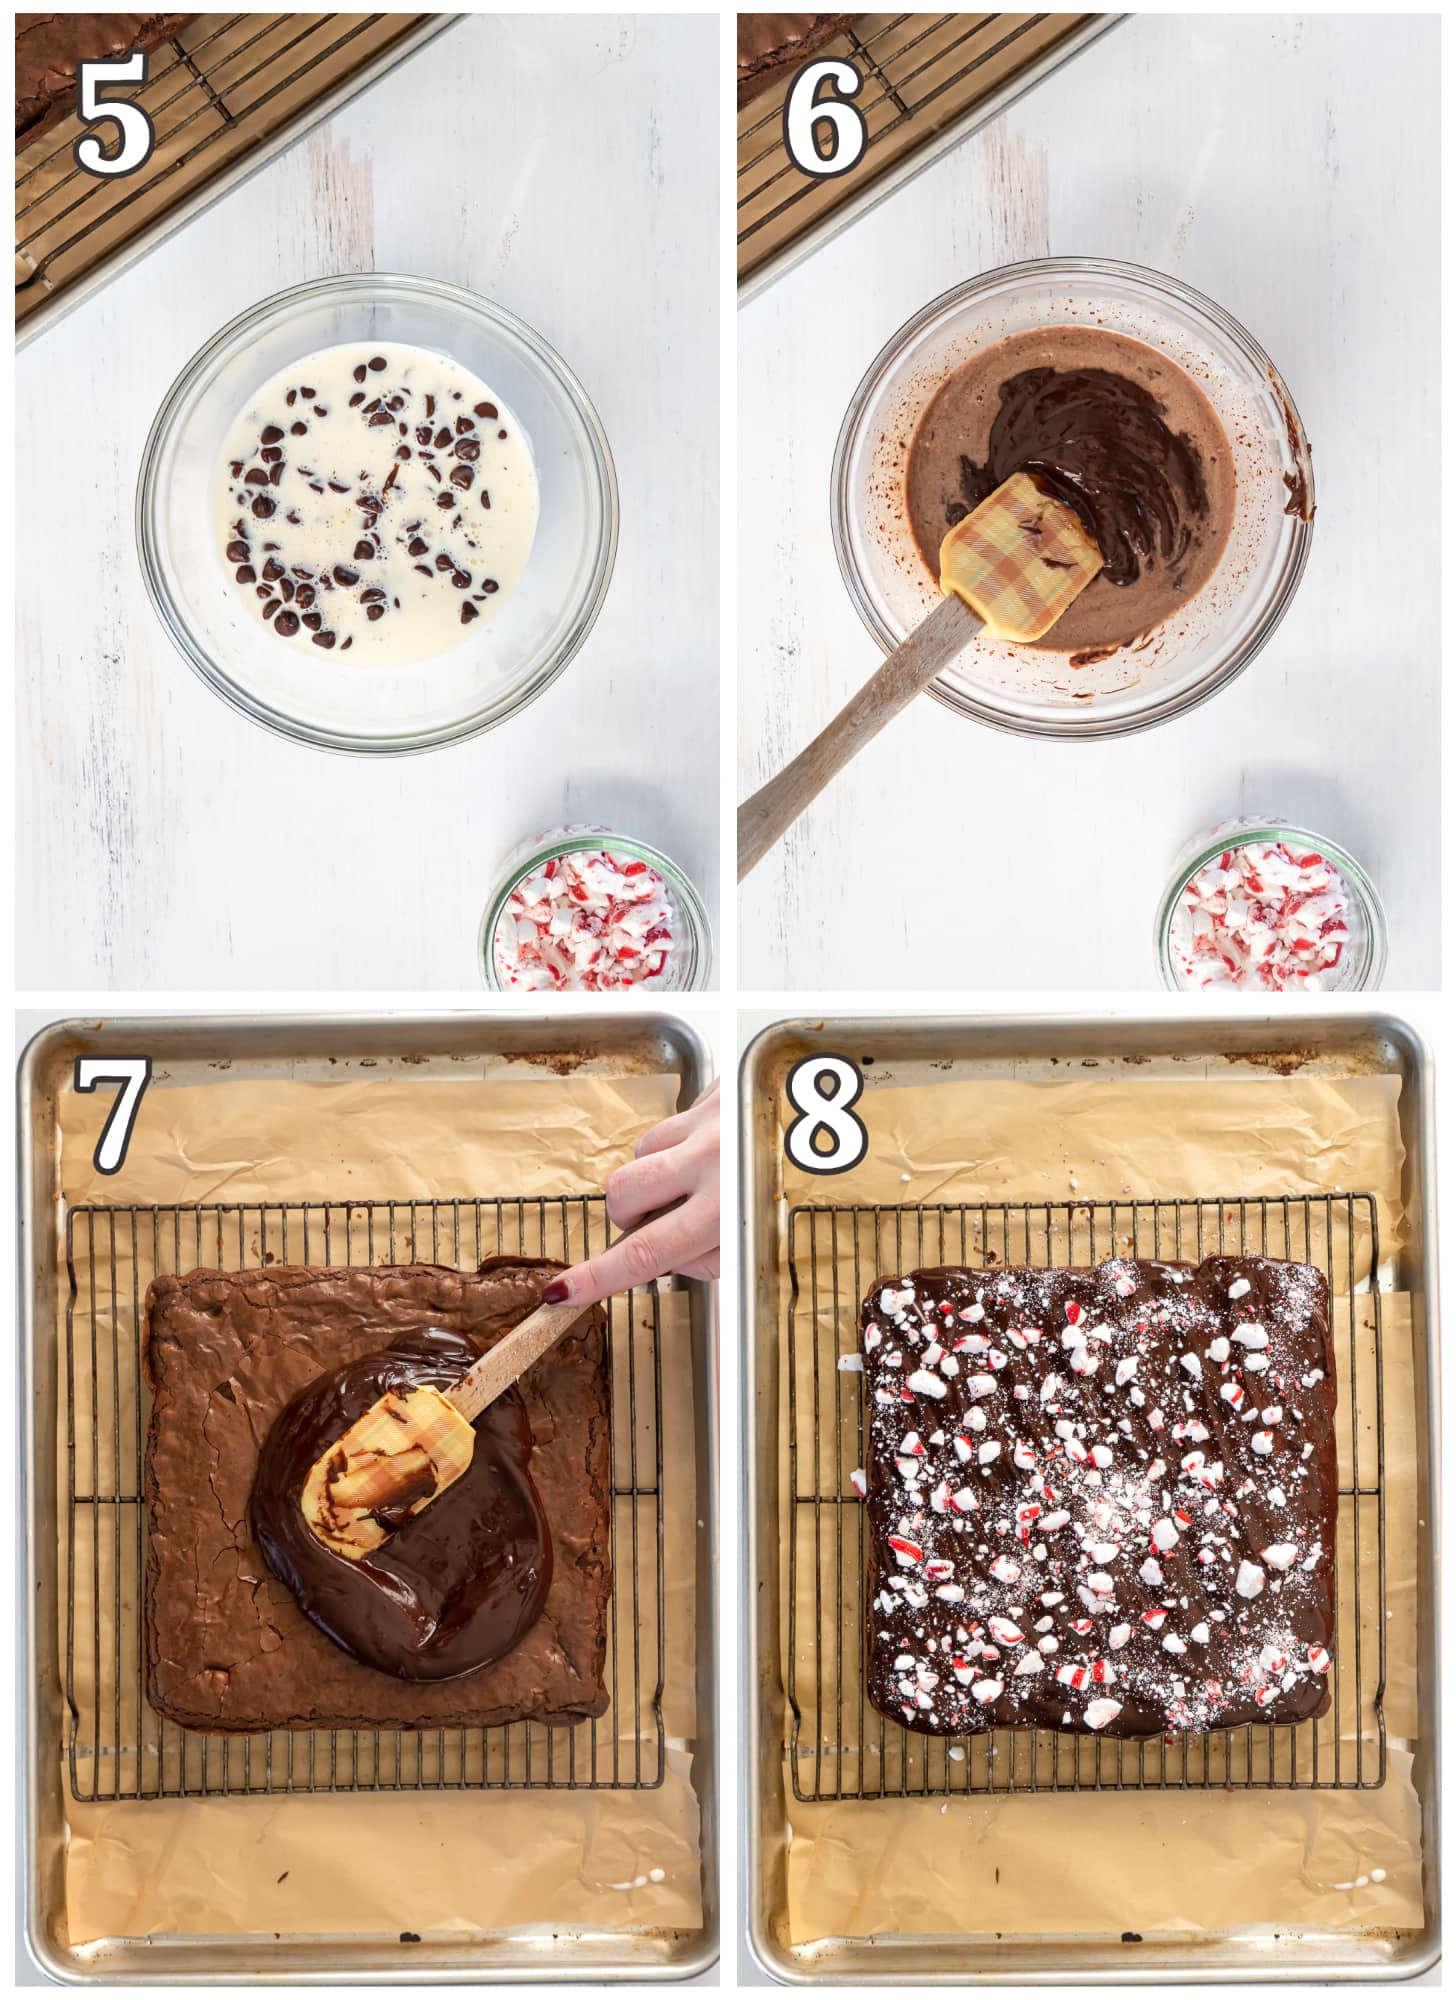 photo collage demonstrating how to make chocolate ganache to top brownies with crushed peppermint.